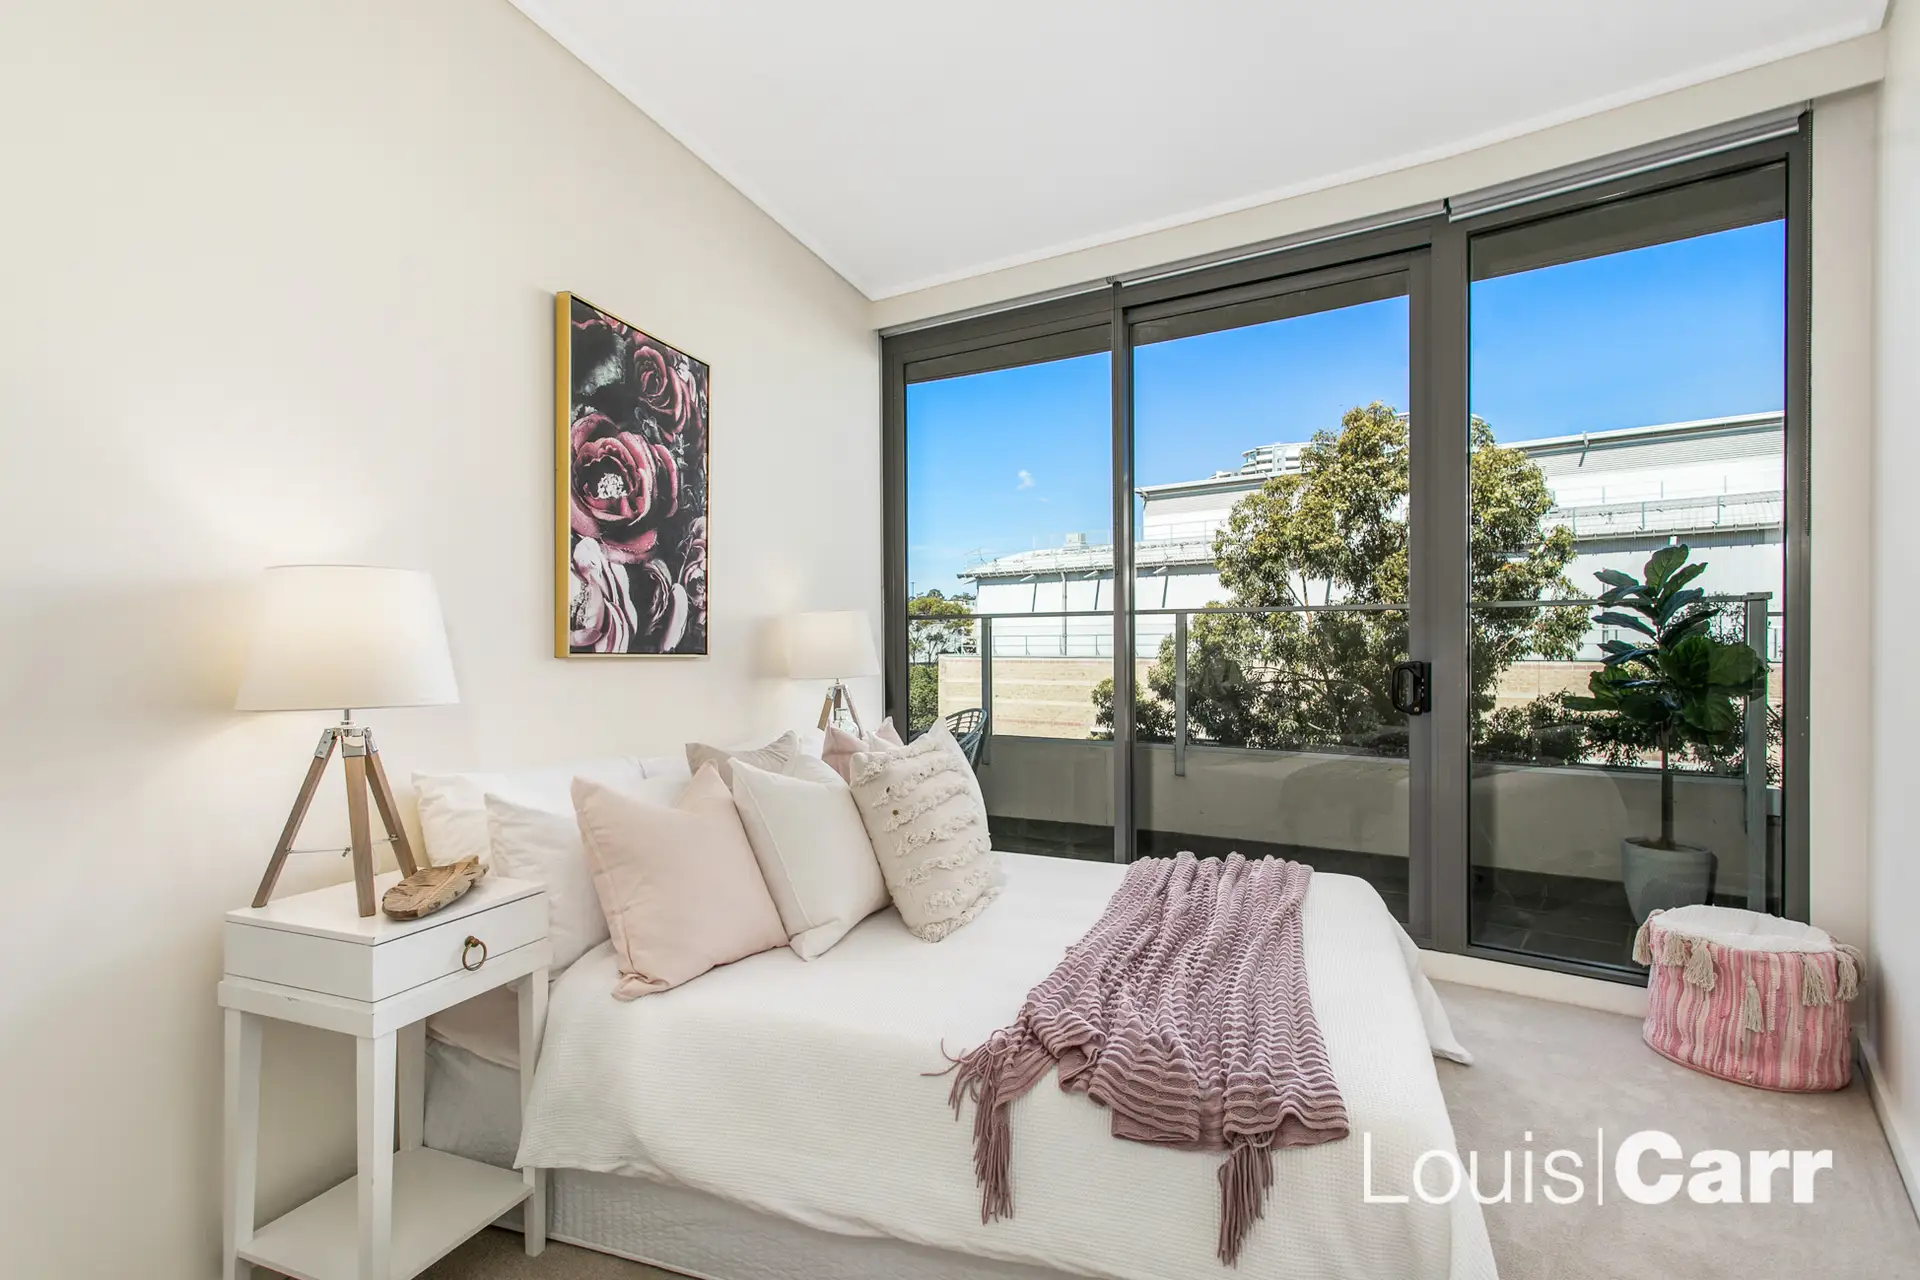 Photo #9: 707/12 Pennant Street, Castle Hill - Sold by Louis Carr Real Estate